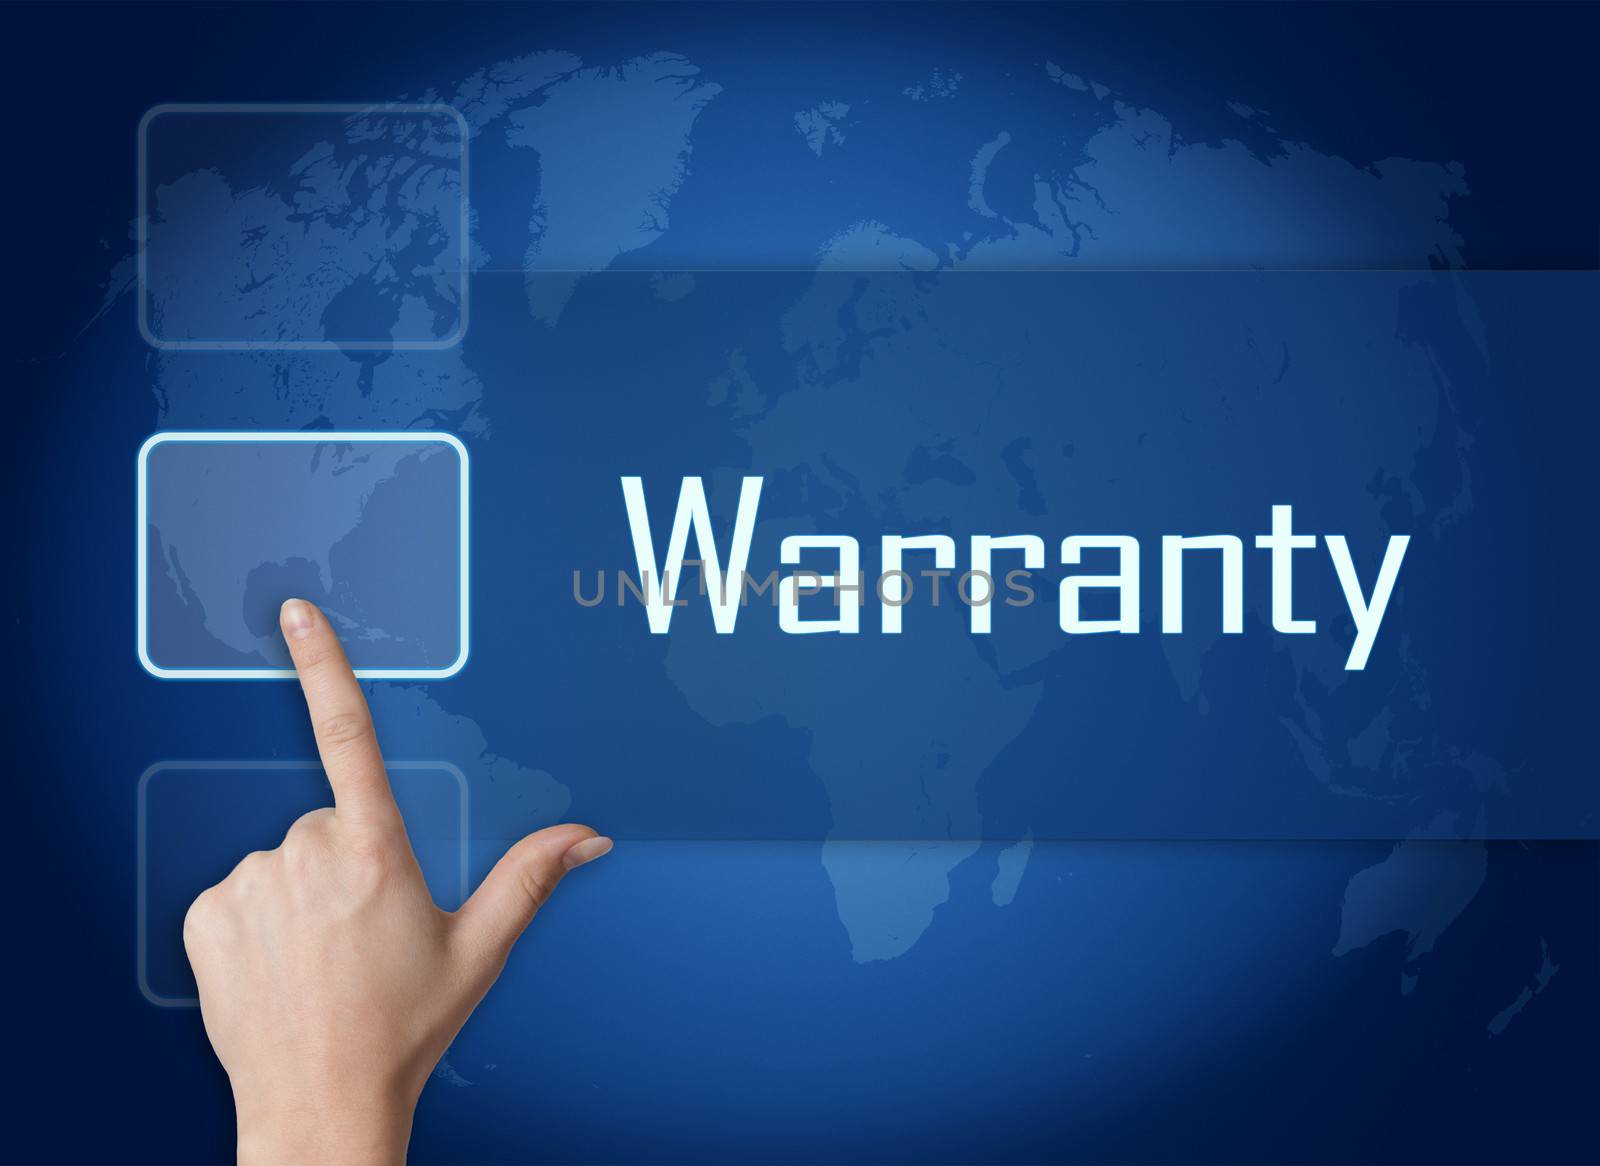 Warranty concept with interface and world map on blue background